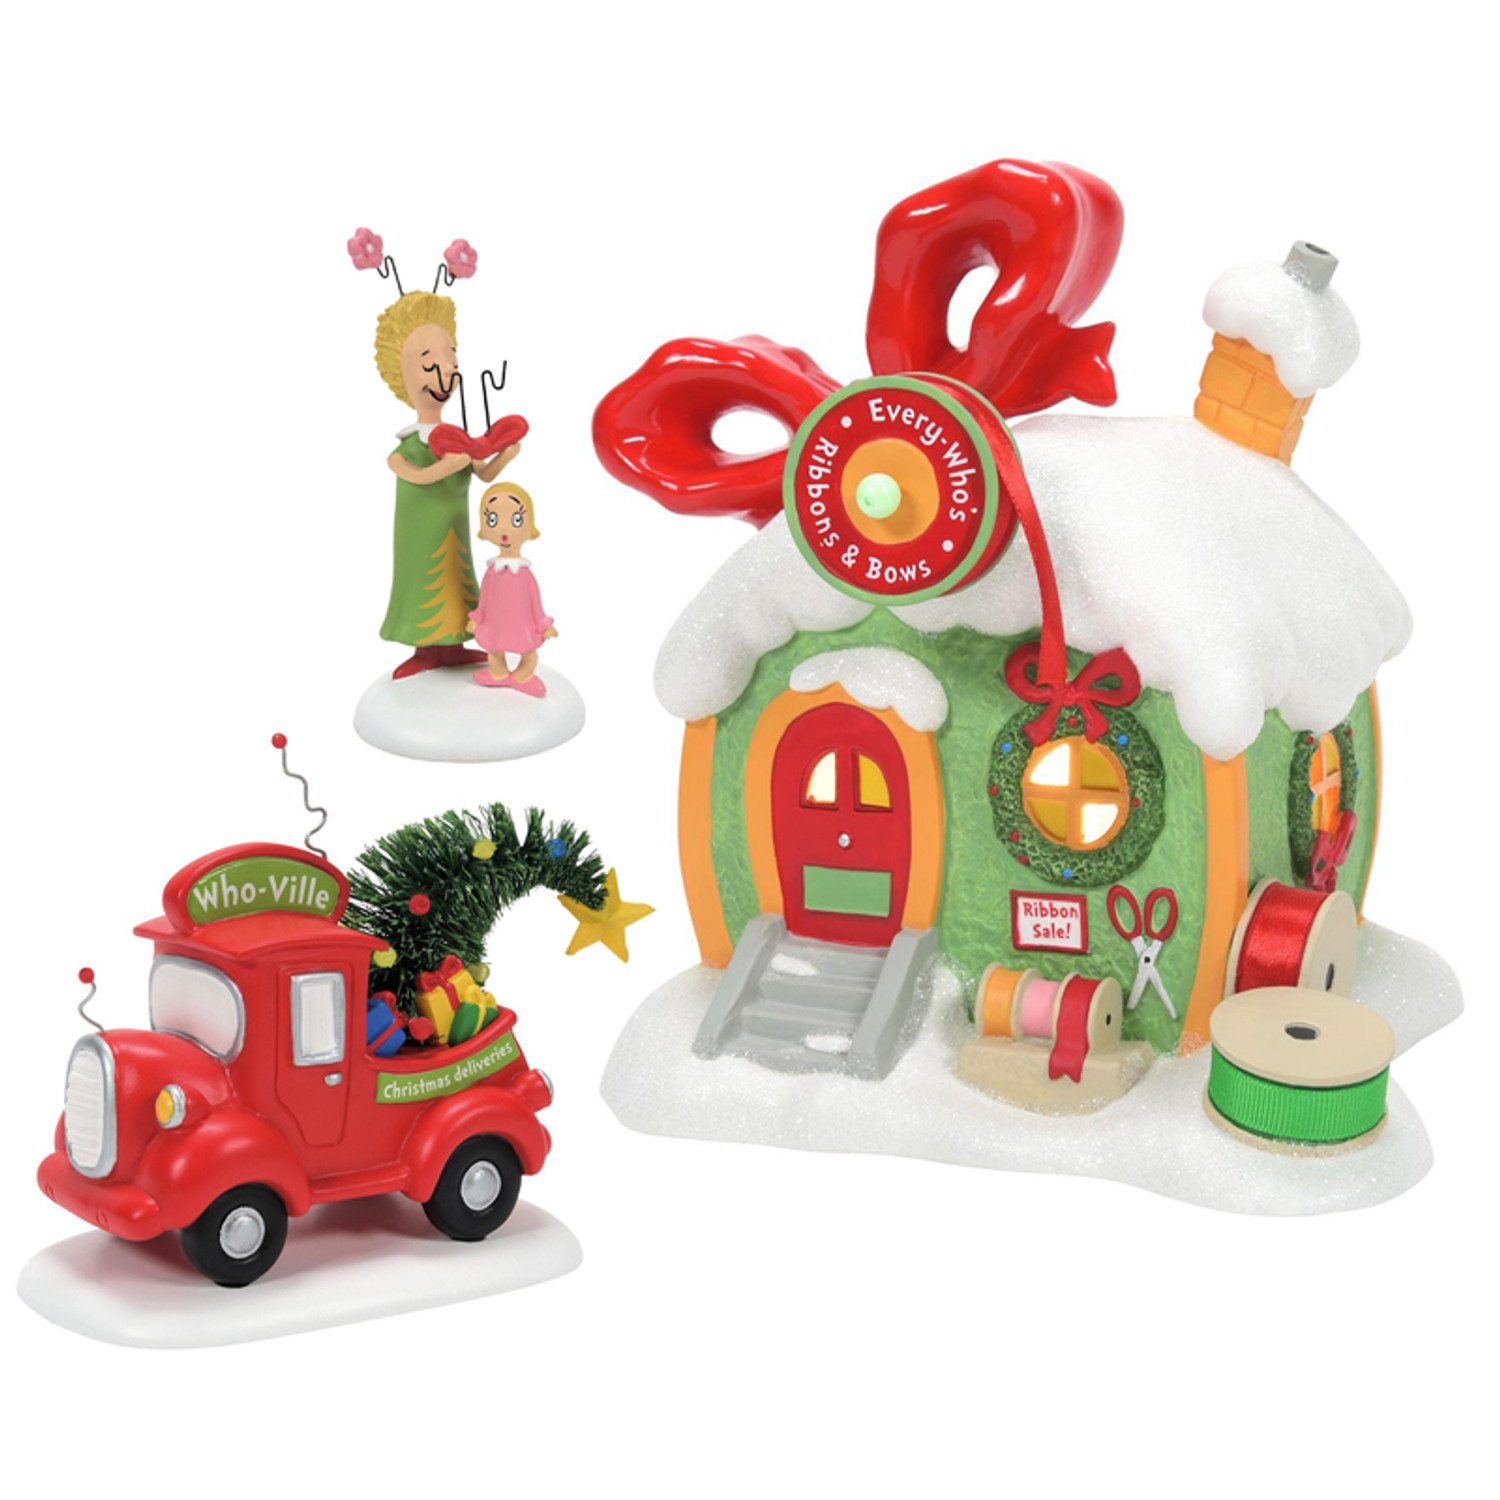 Department 56 The Grinch Village New for 2023 3 pc Set, Department 56, Department 56 Village